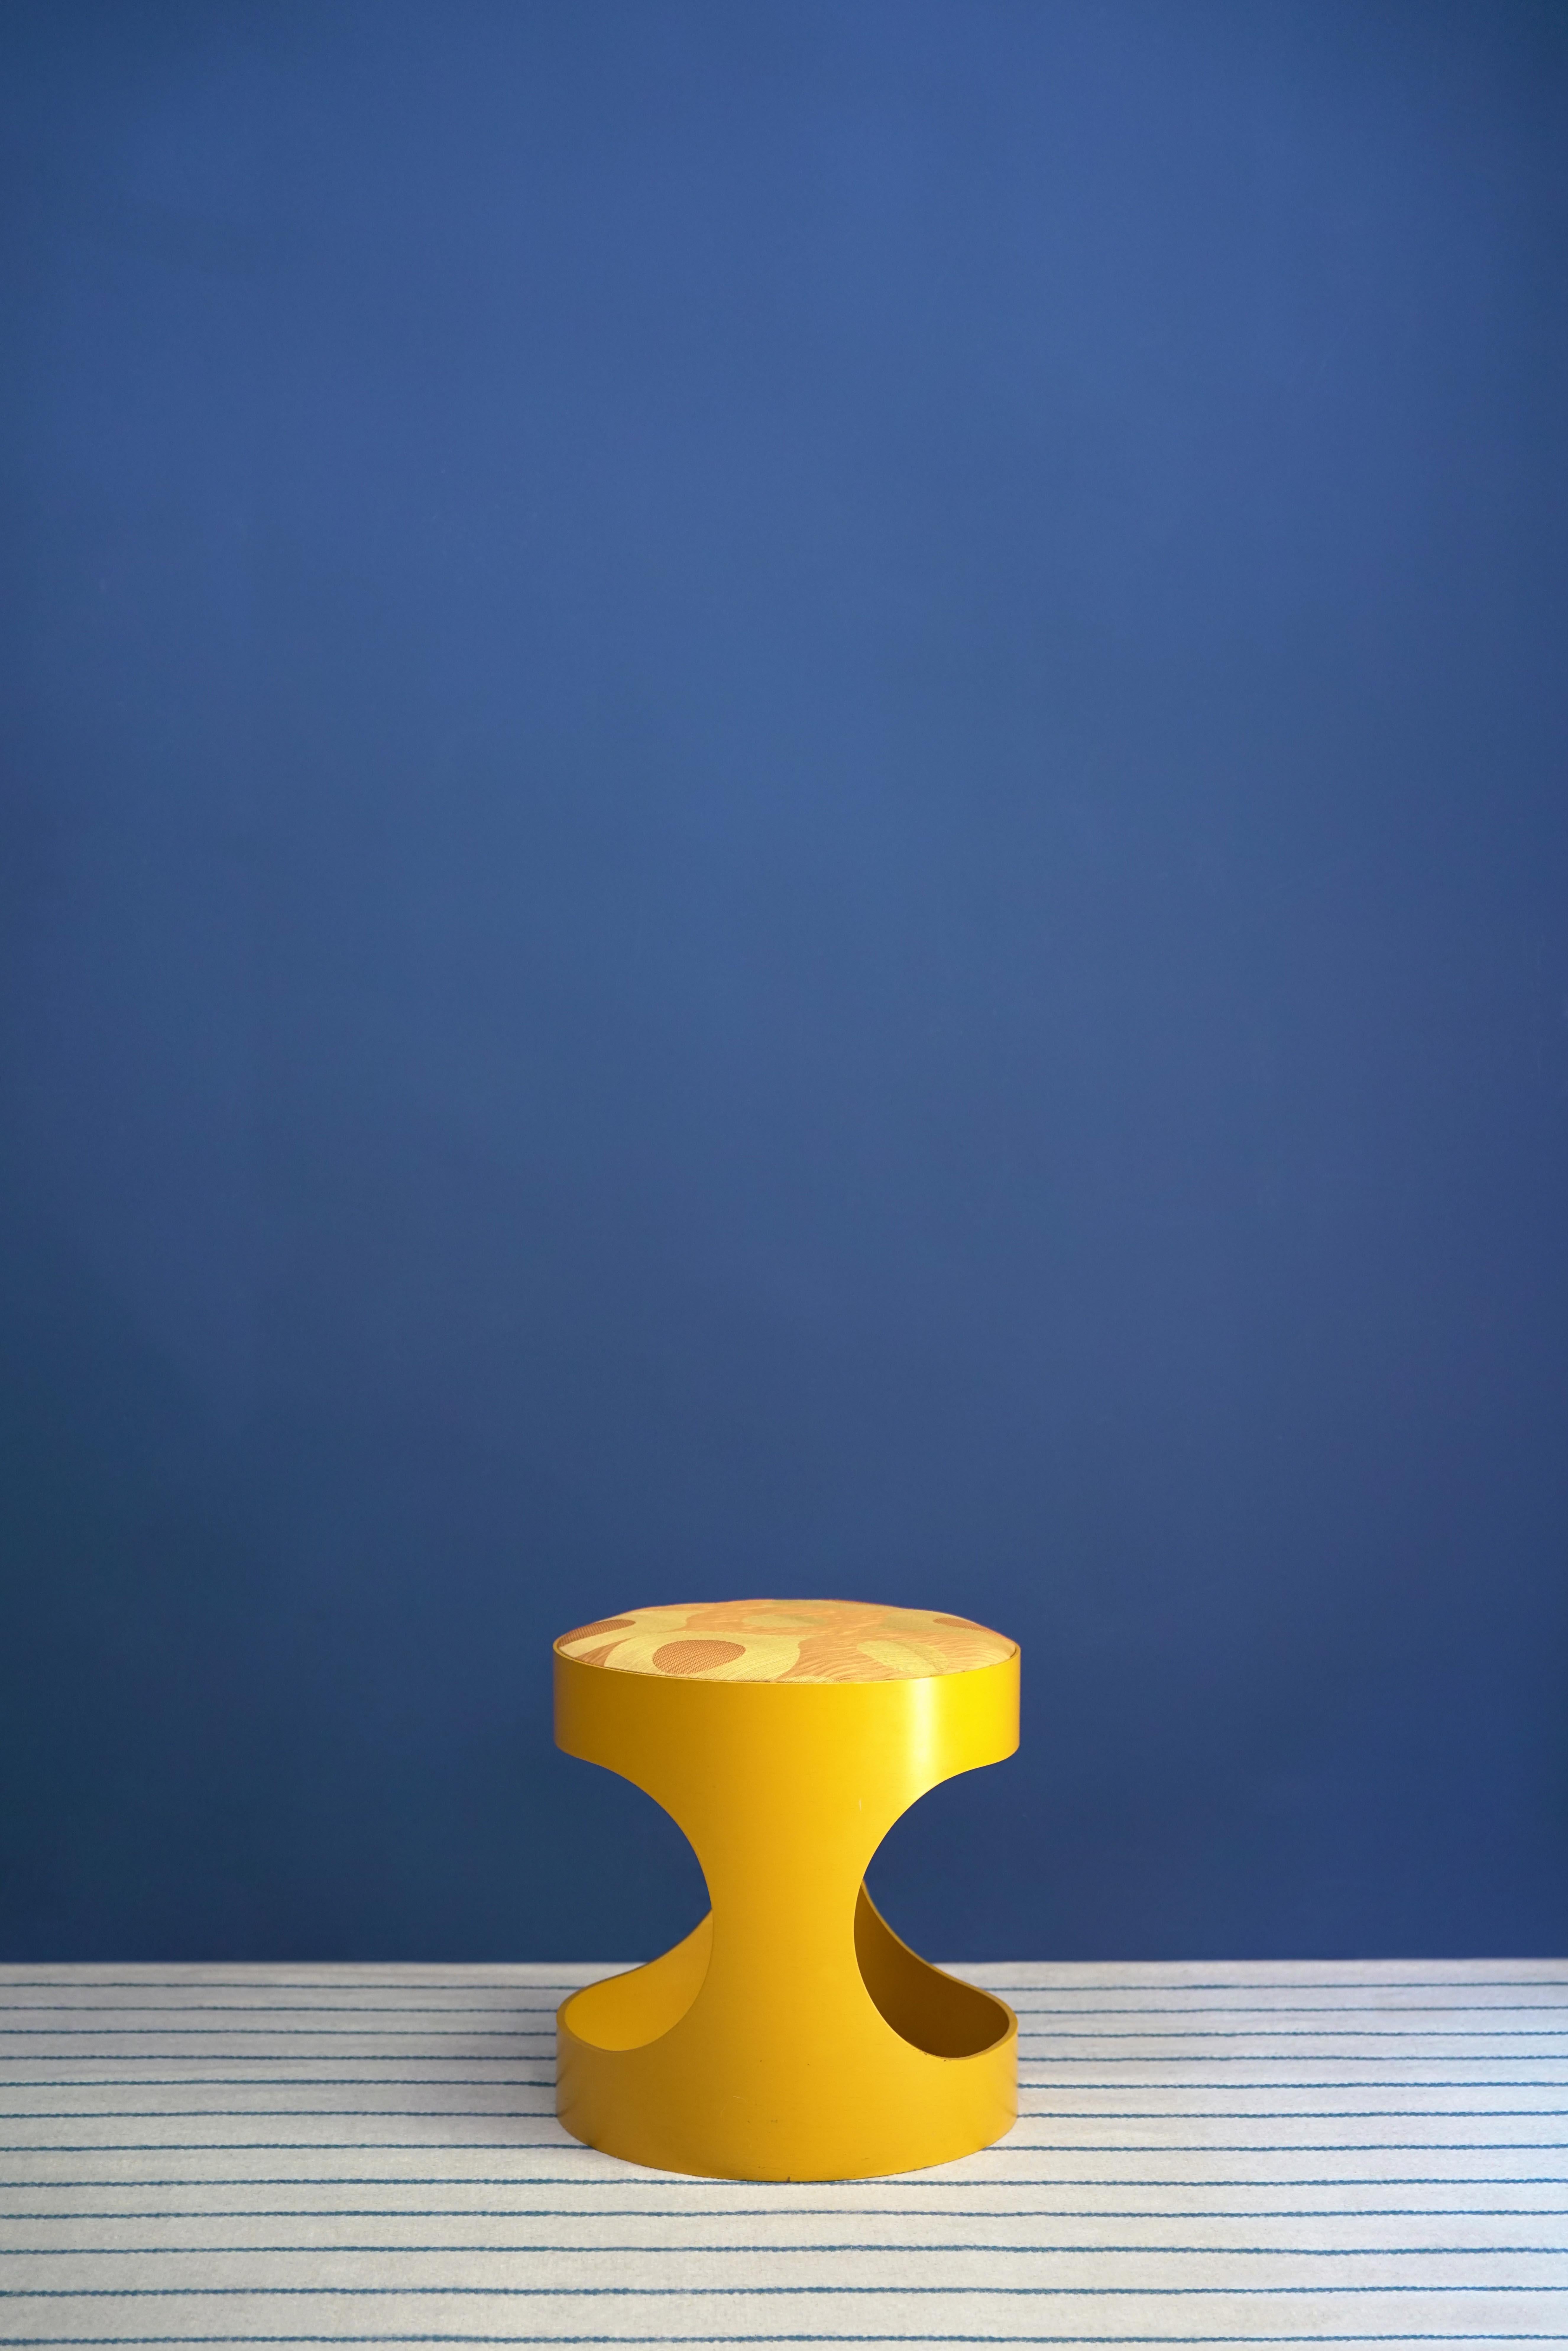 1960's stool made of curved wood lacquered in yellow with silk seat by David Hicks.

David Nightingale Hicks (25 March 1929 – 29 March 1998) was an English interior decorator and designer, noted for using bold colours, mixing antique and modern